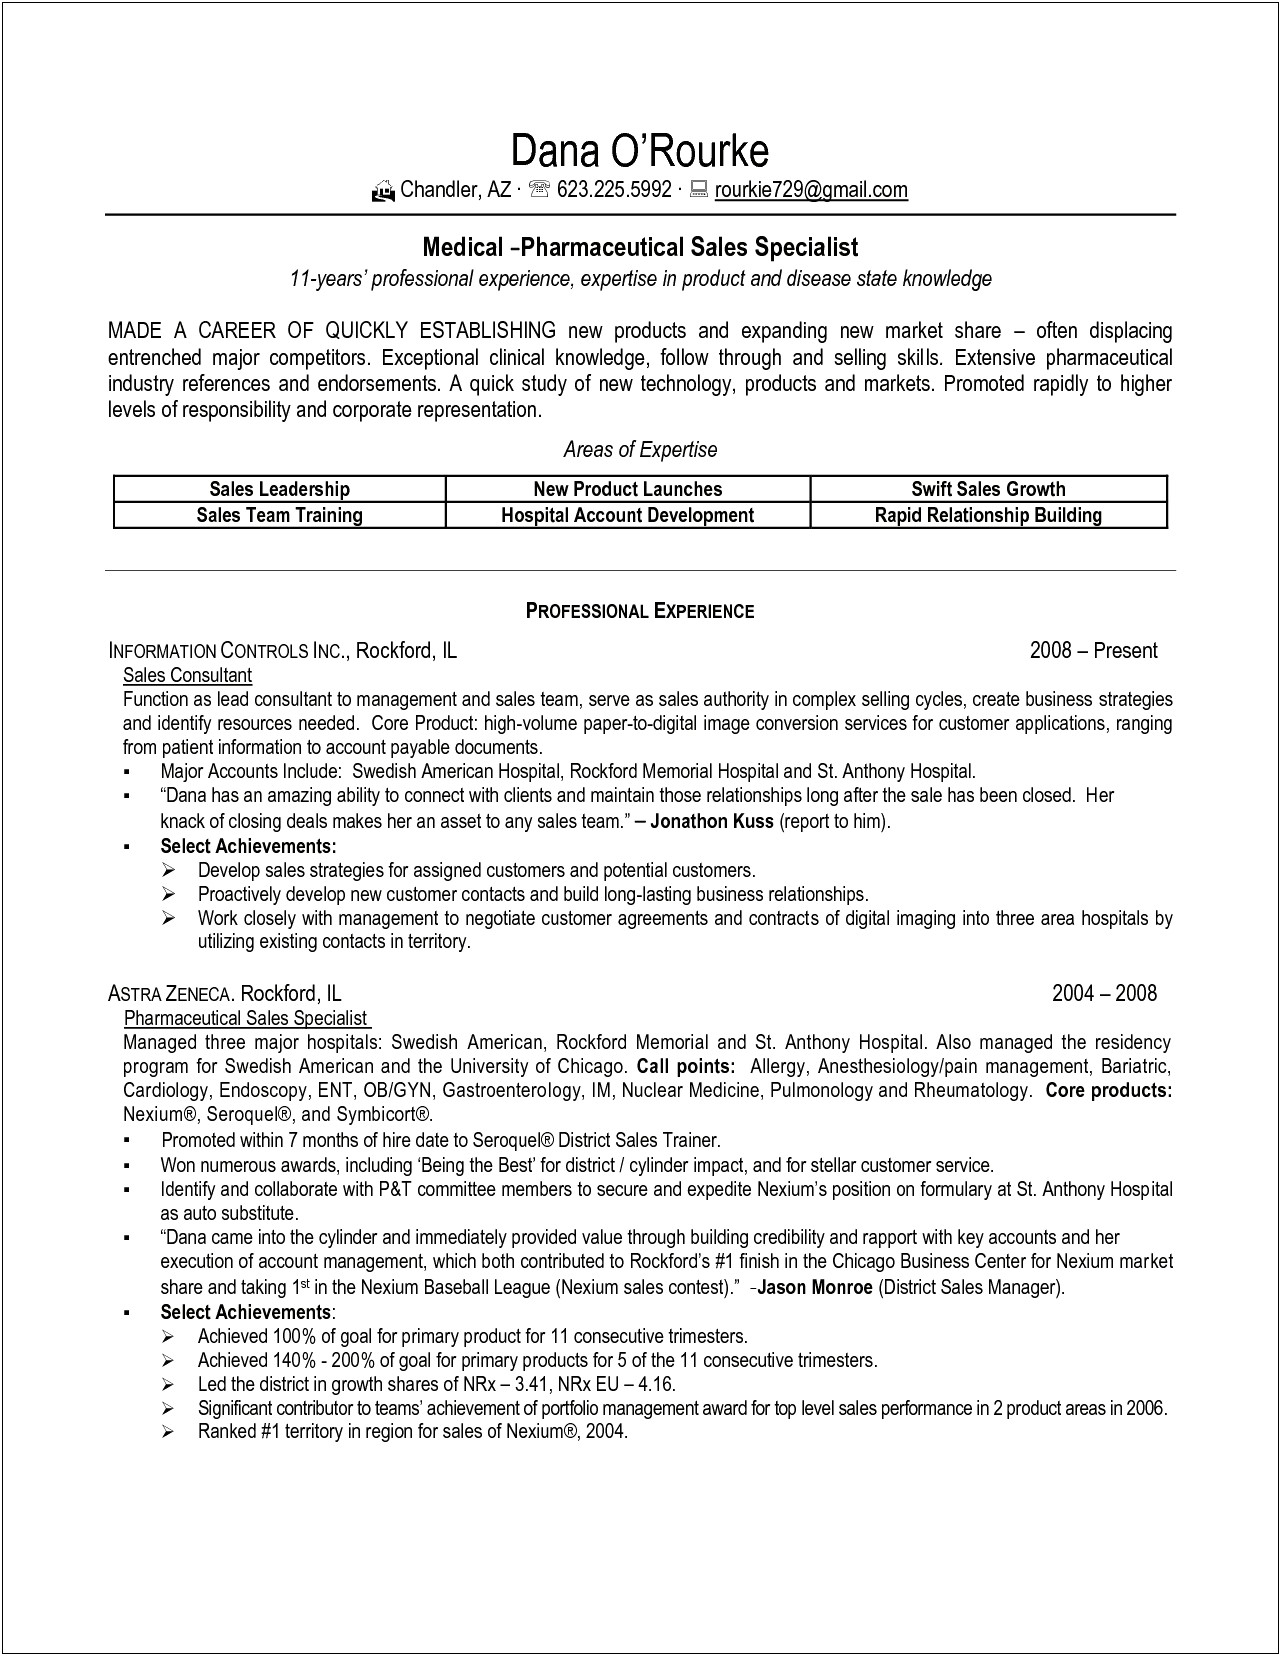 Pharmaceutical Industry Resume Objective Examples